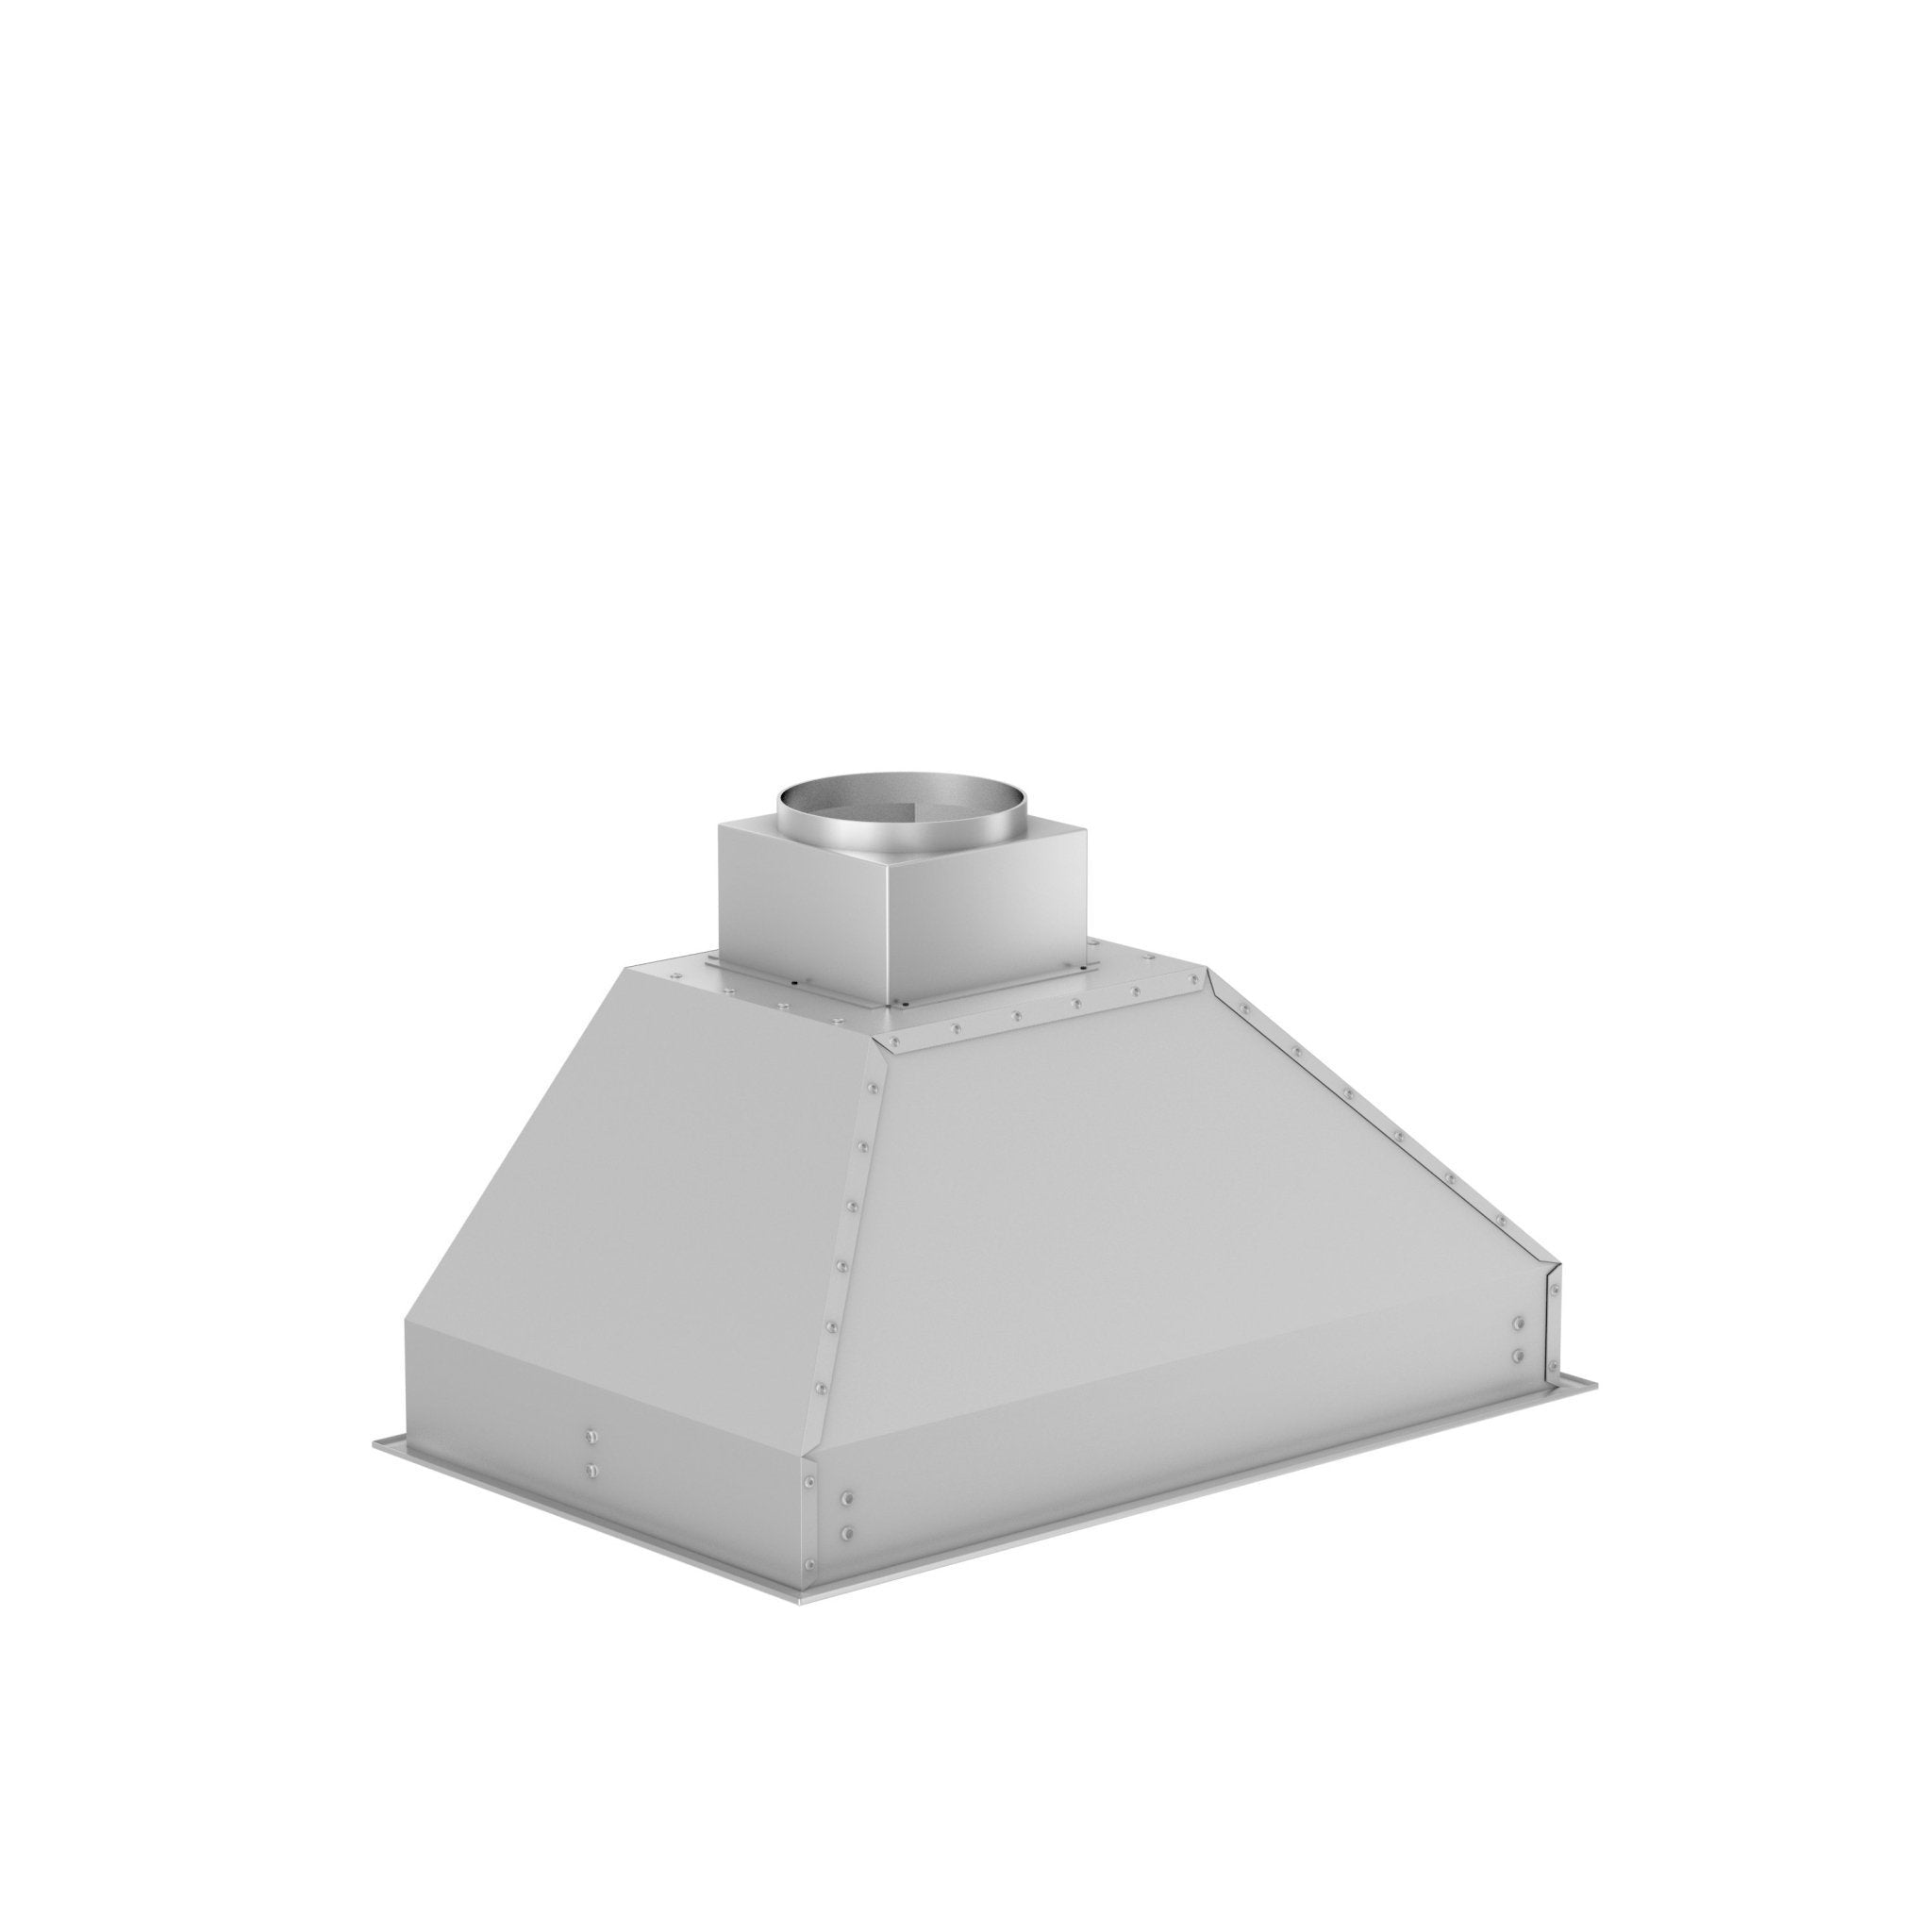 ZLINE Ducted Wall Mount Range Hood Insert in Outdoor Approved Stainless Steel - 721-304